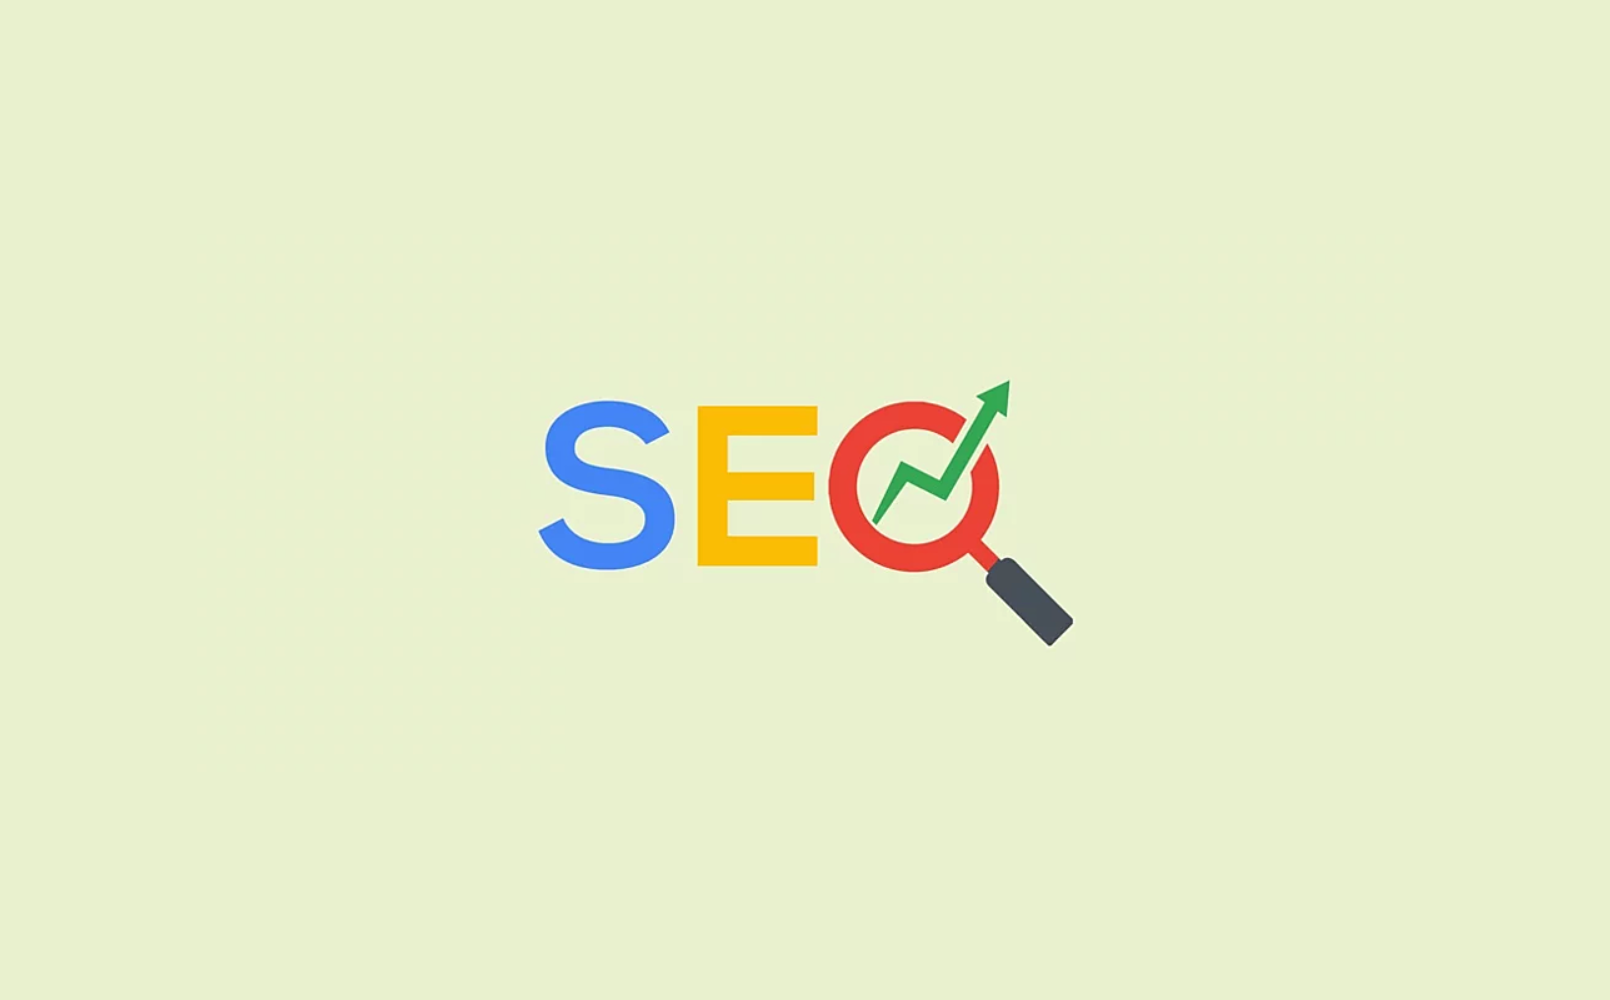 What Our SEO Specialists Can Do For You